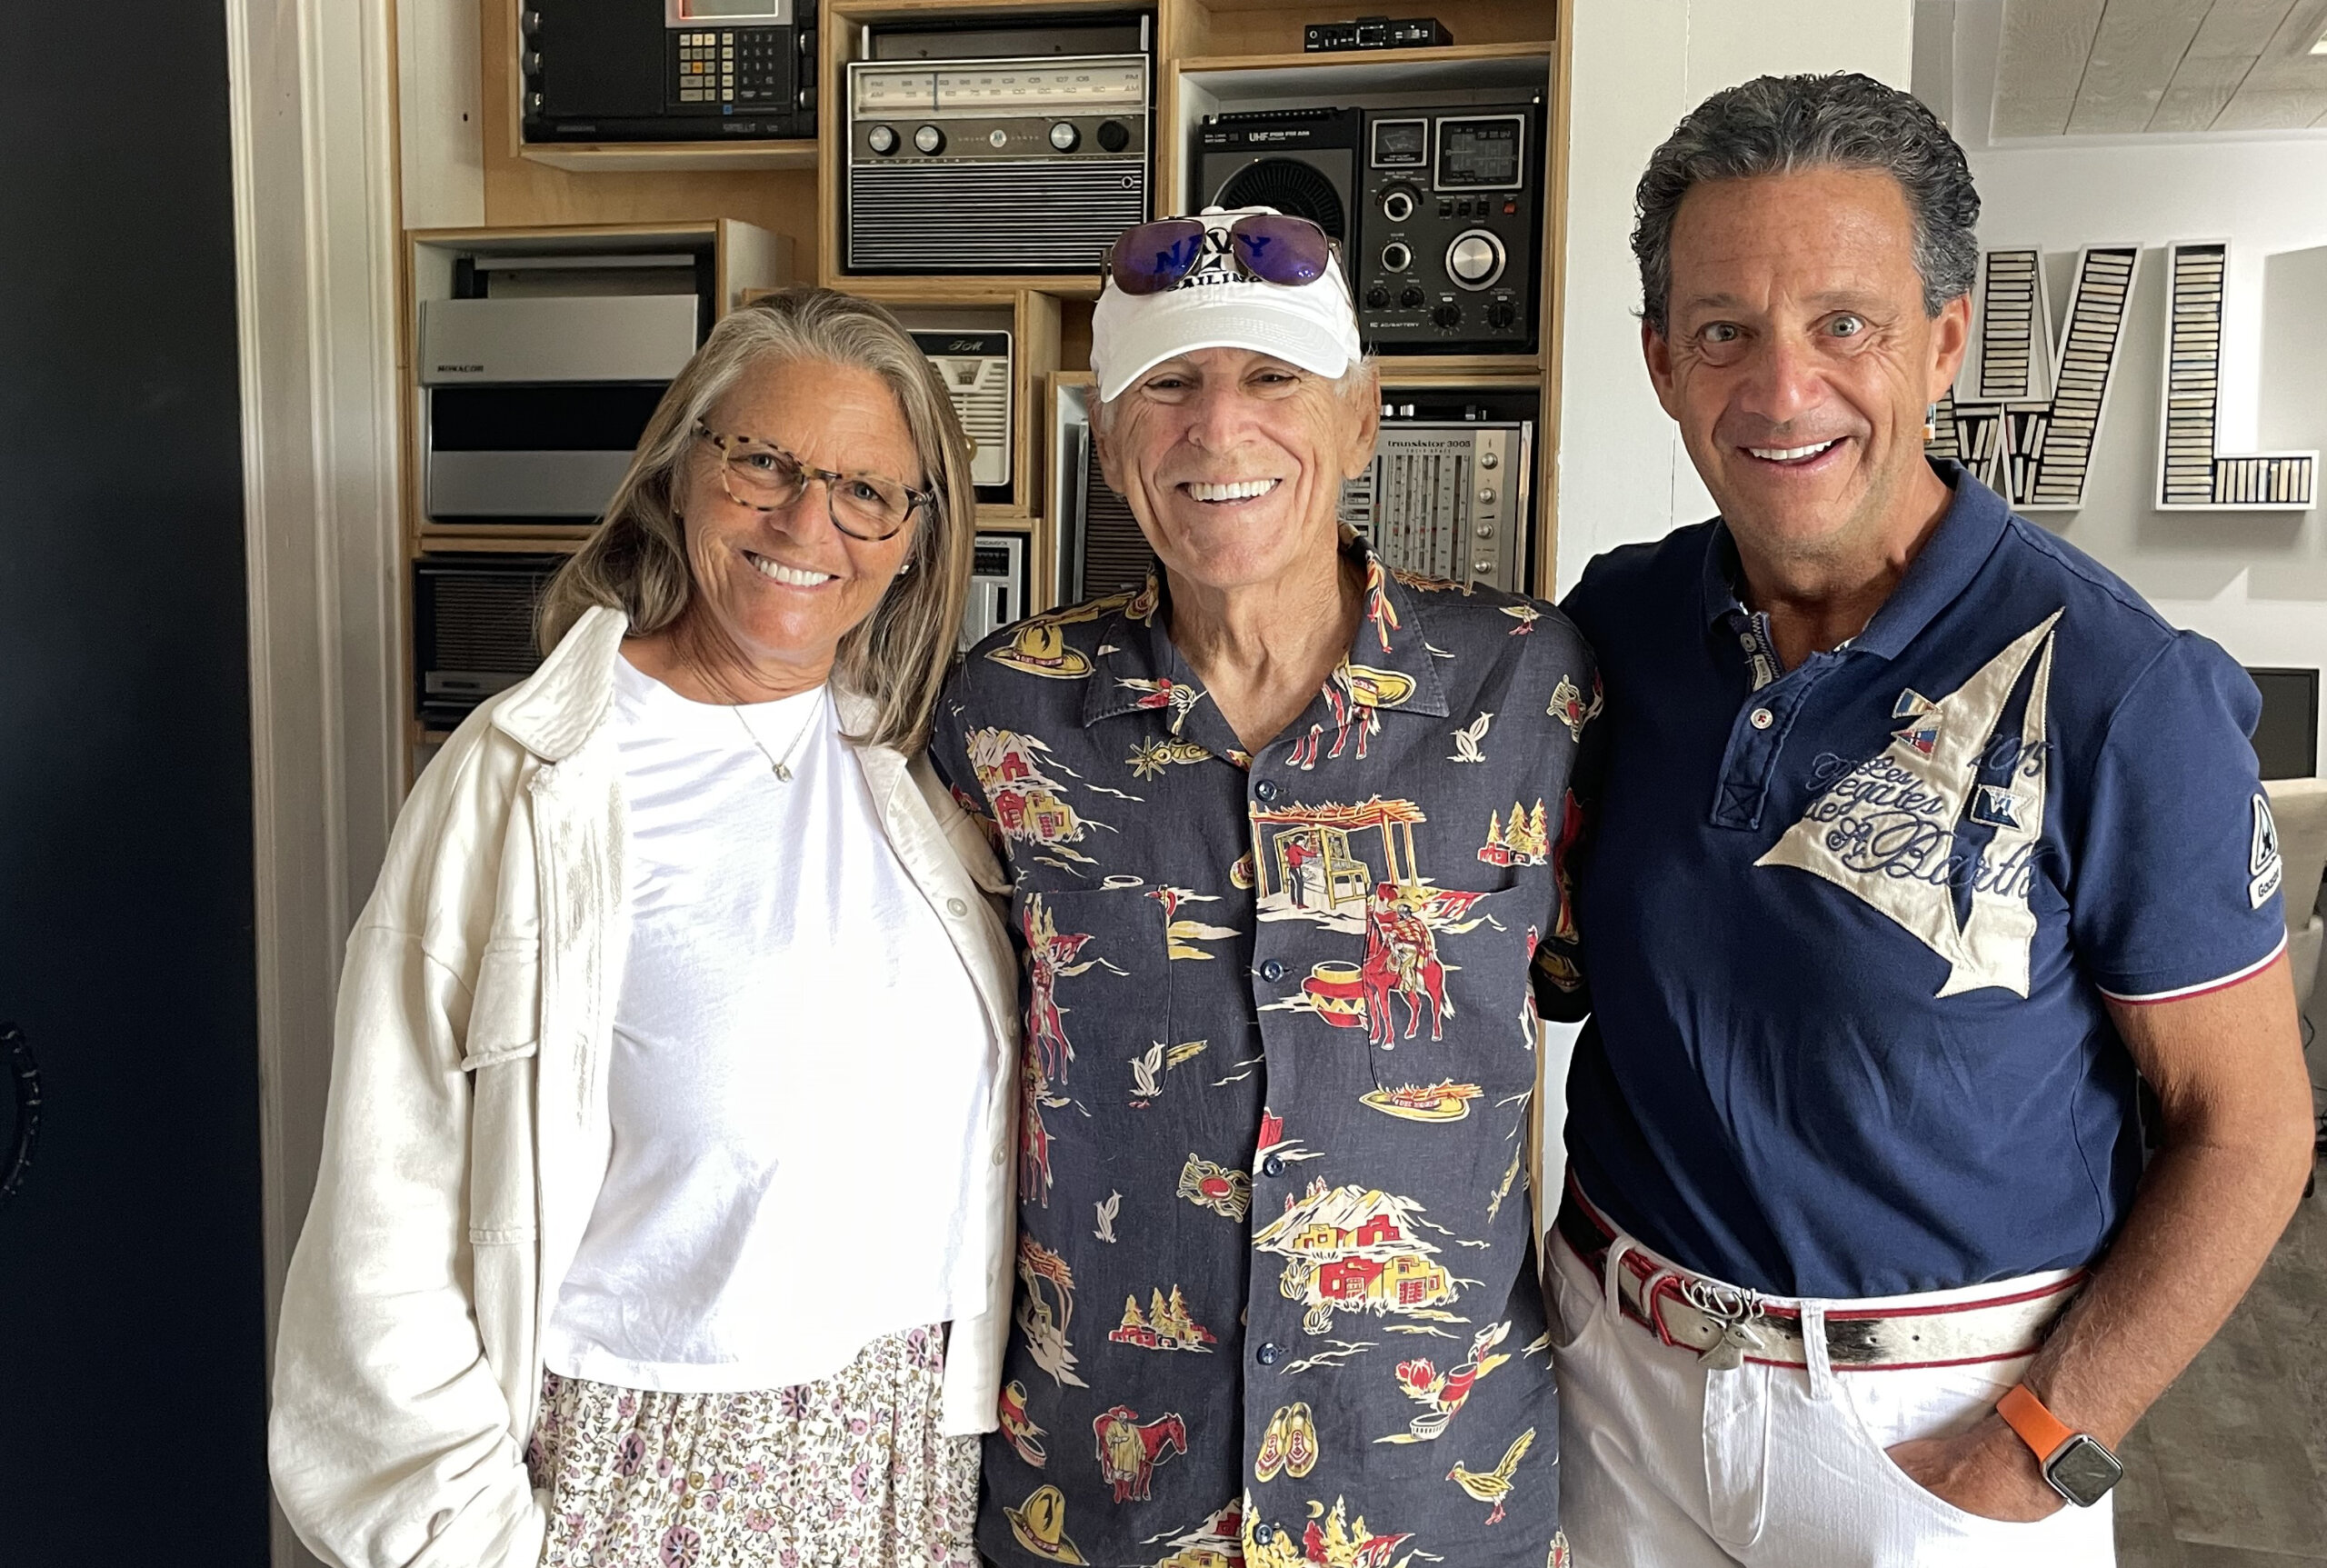 Jimmy Buffett with "Lunch on Deck" hosts Jessica Ambrose and Bill Evans at WLNG